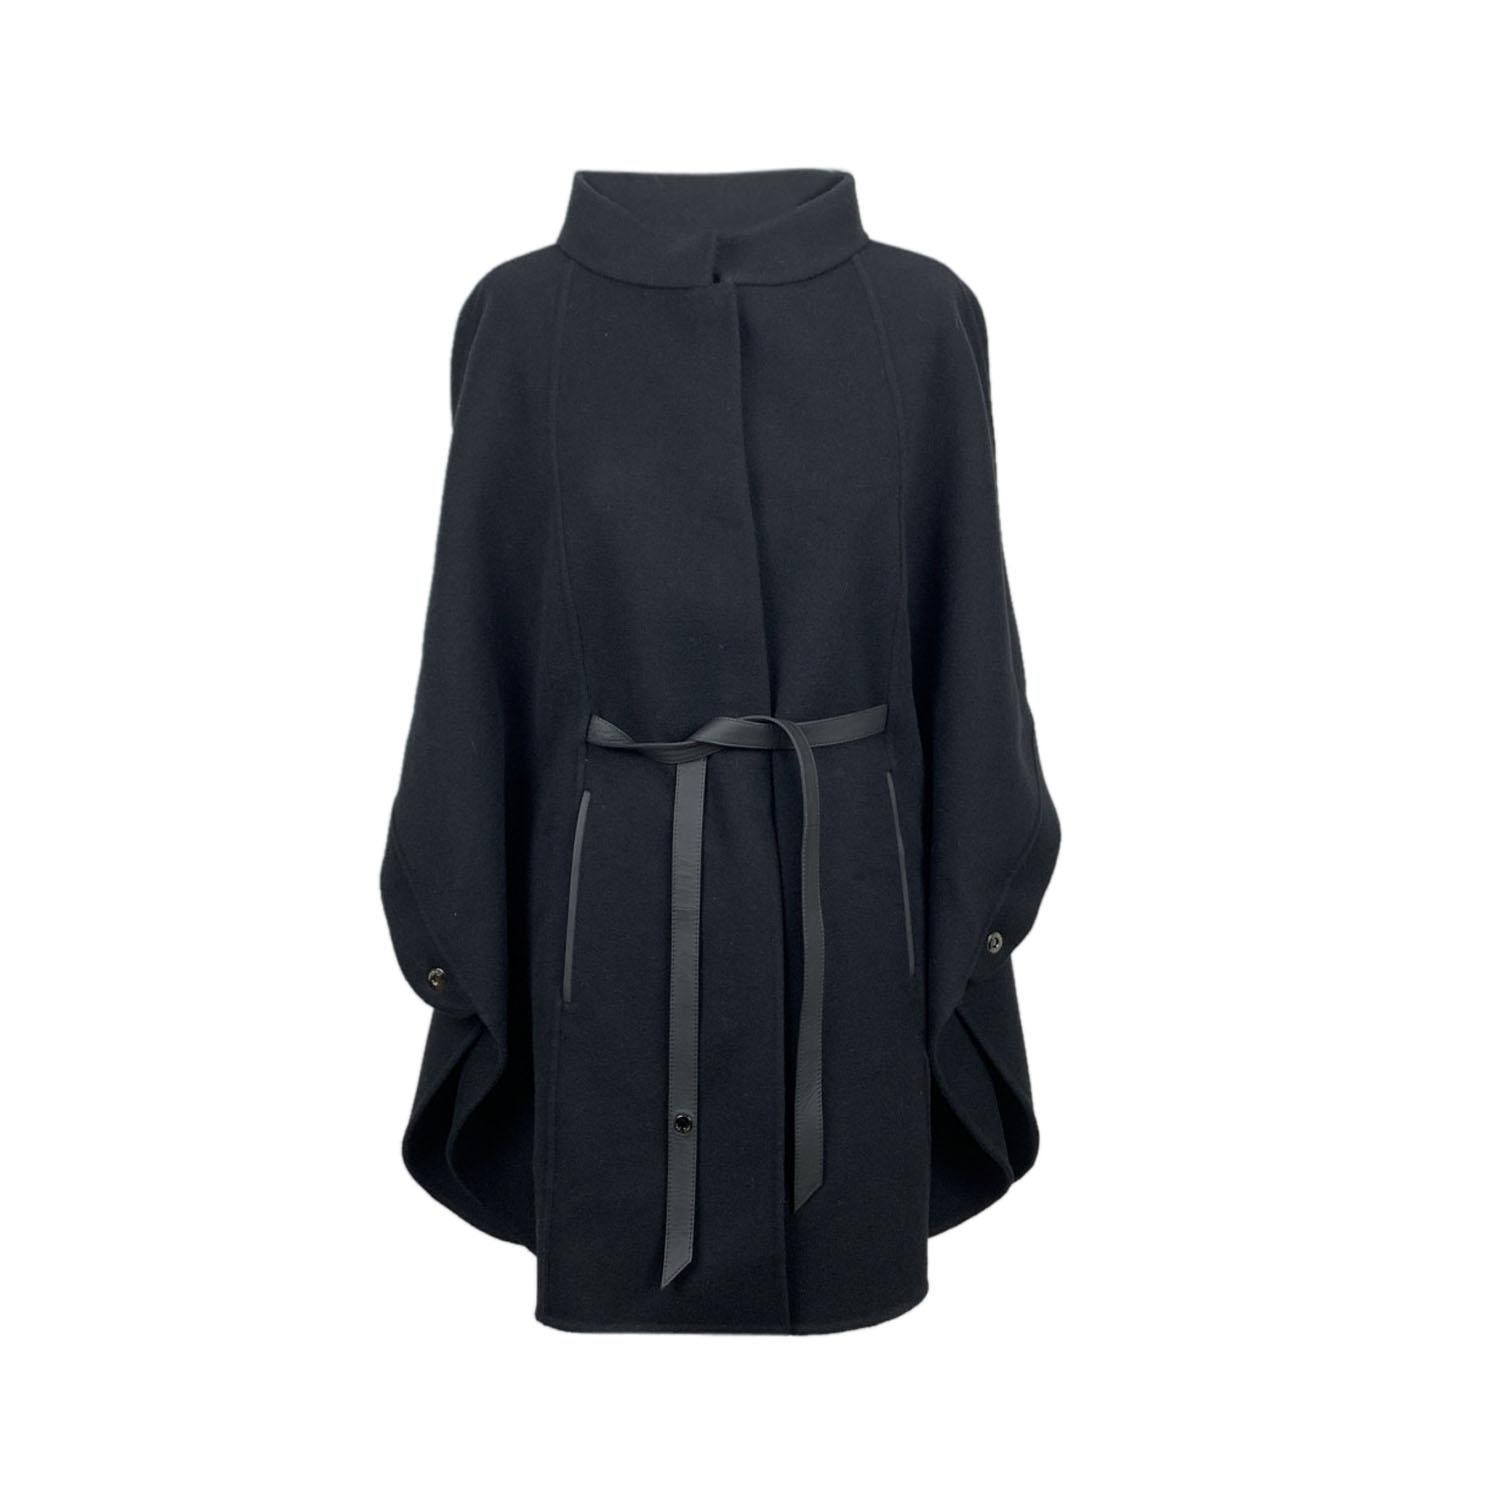 Beautiful Loro Piana 'Salzburg' Cape in black color. Crafted in 100% cashmere. Concealed button closure on the front. Relaxed fit. Button closure on the front. Black leather belt. Side pockets. Unlined. Size: One size. Made in